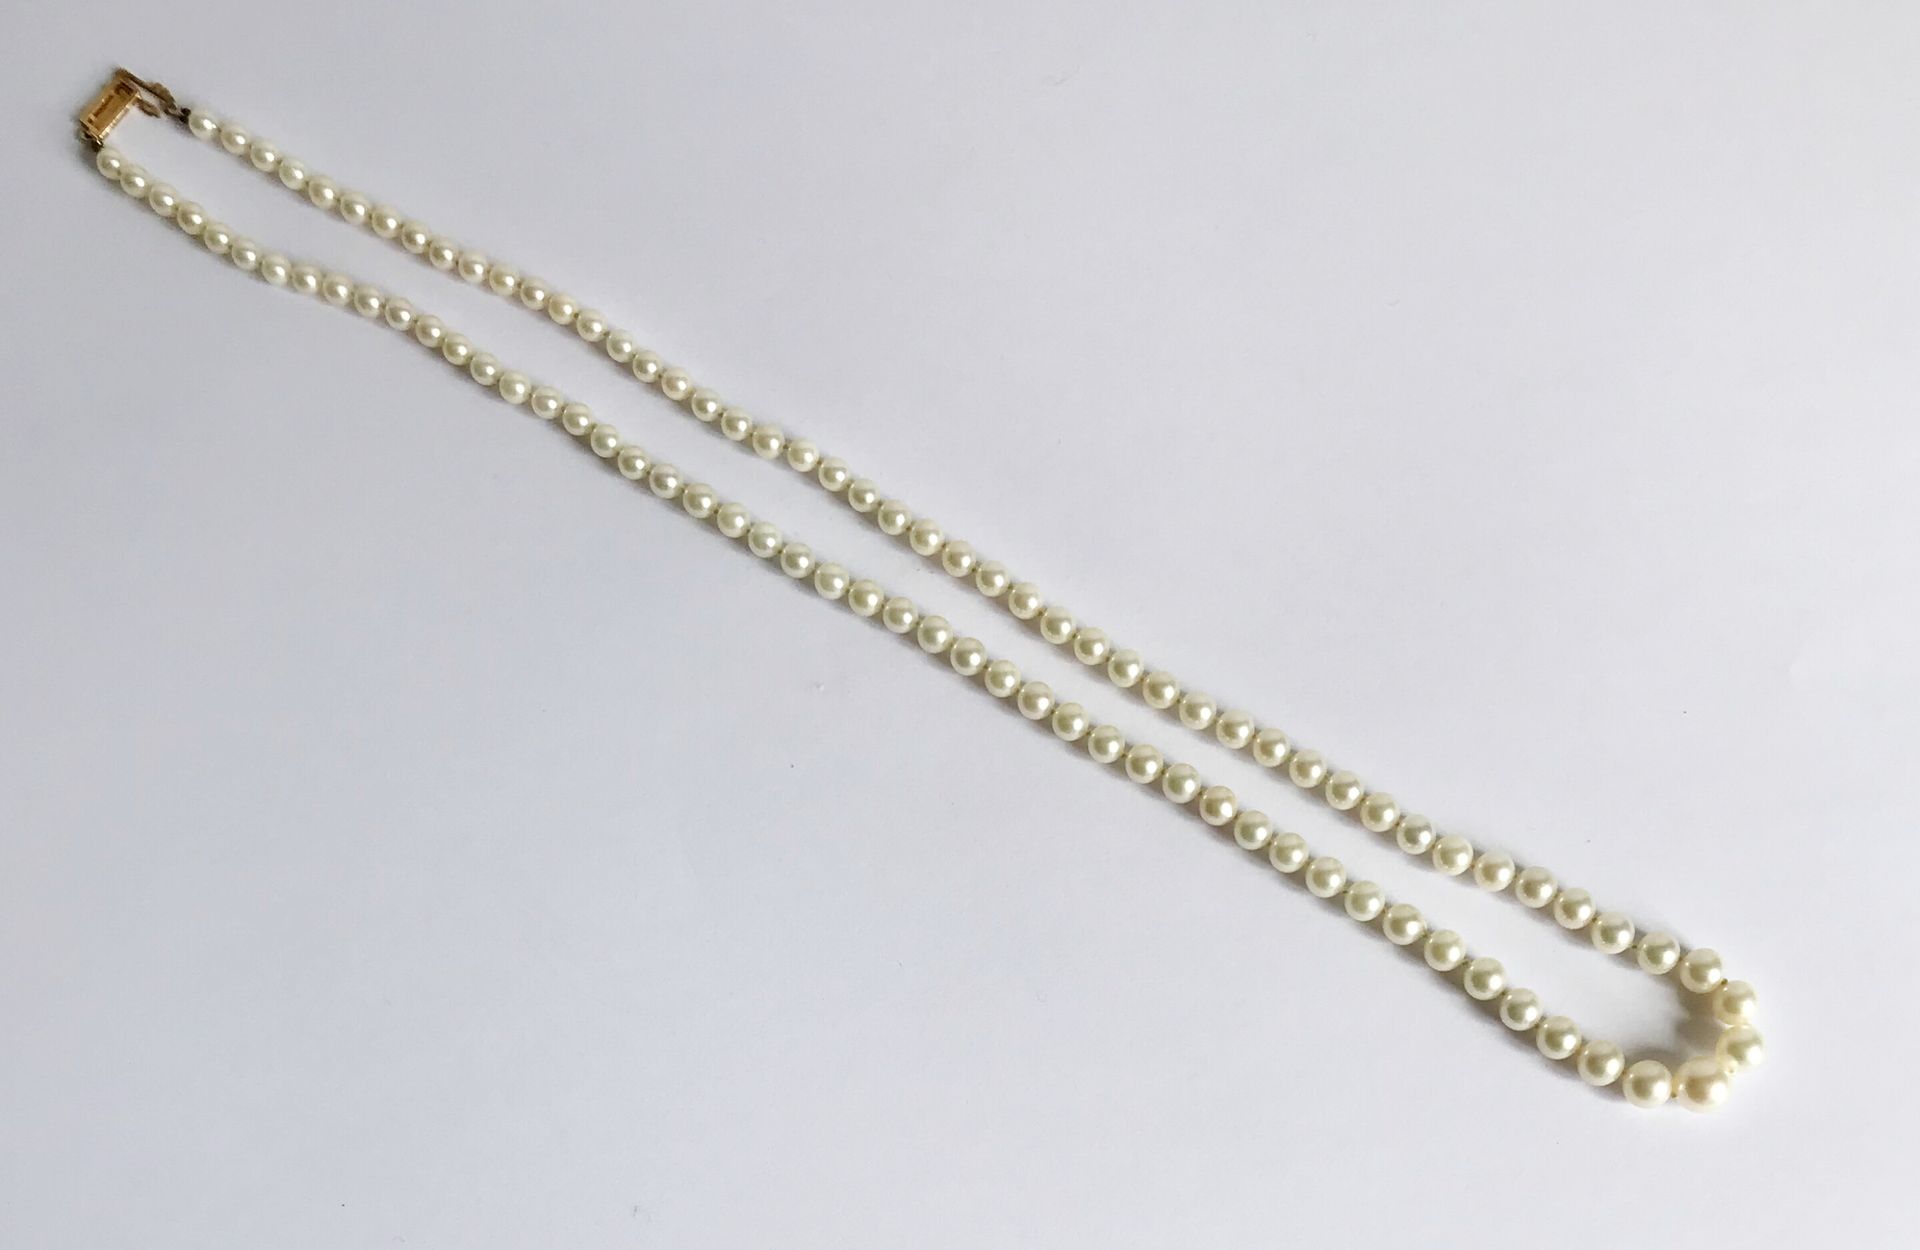 Null Necklace of cultured pearls in fall. Gold clasp

L.: 55 cm